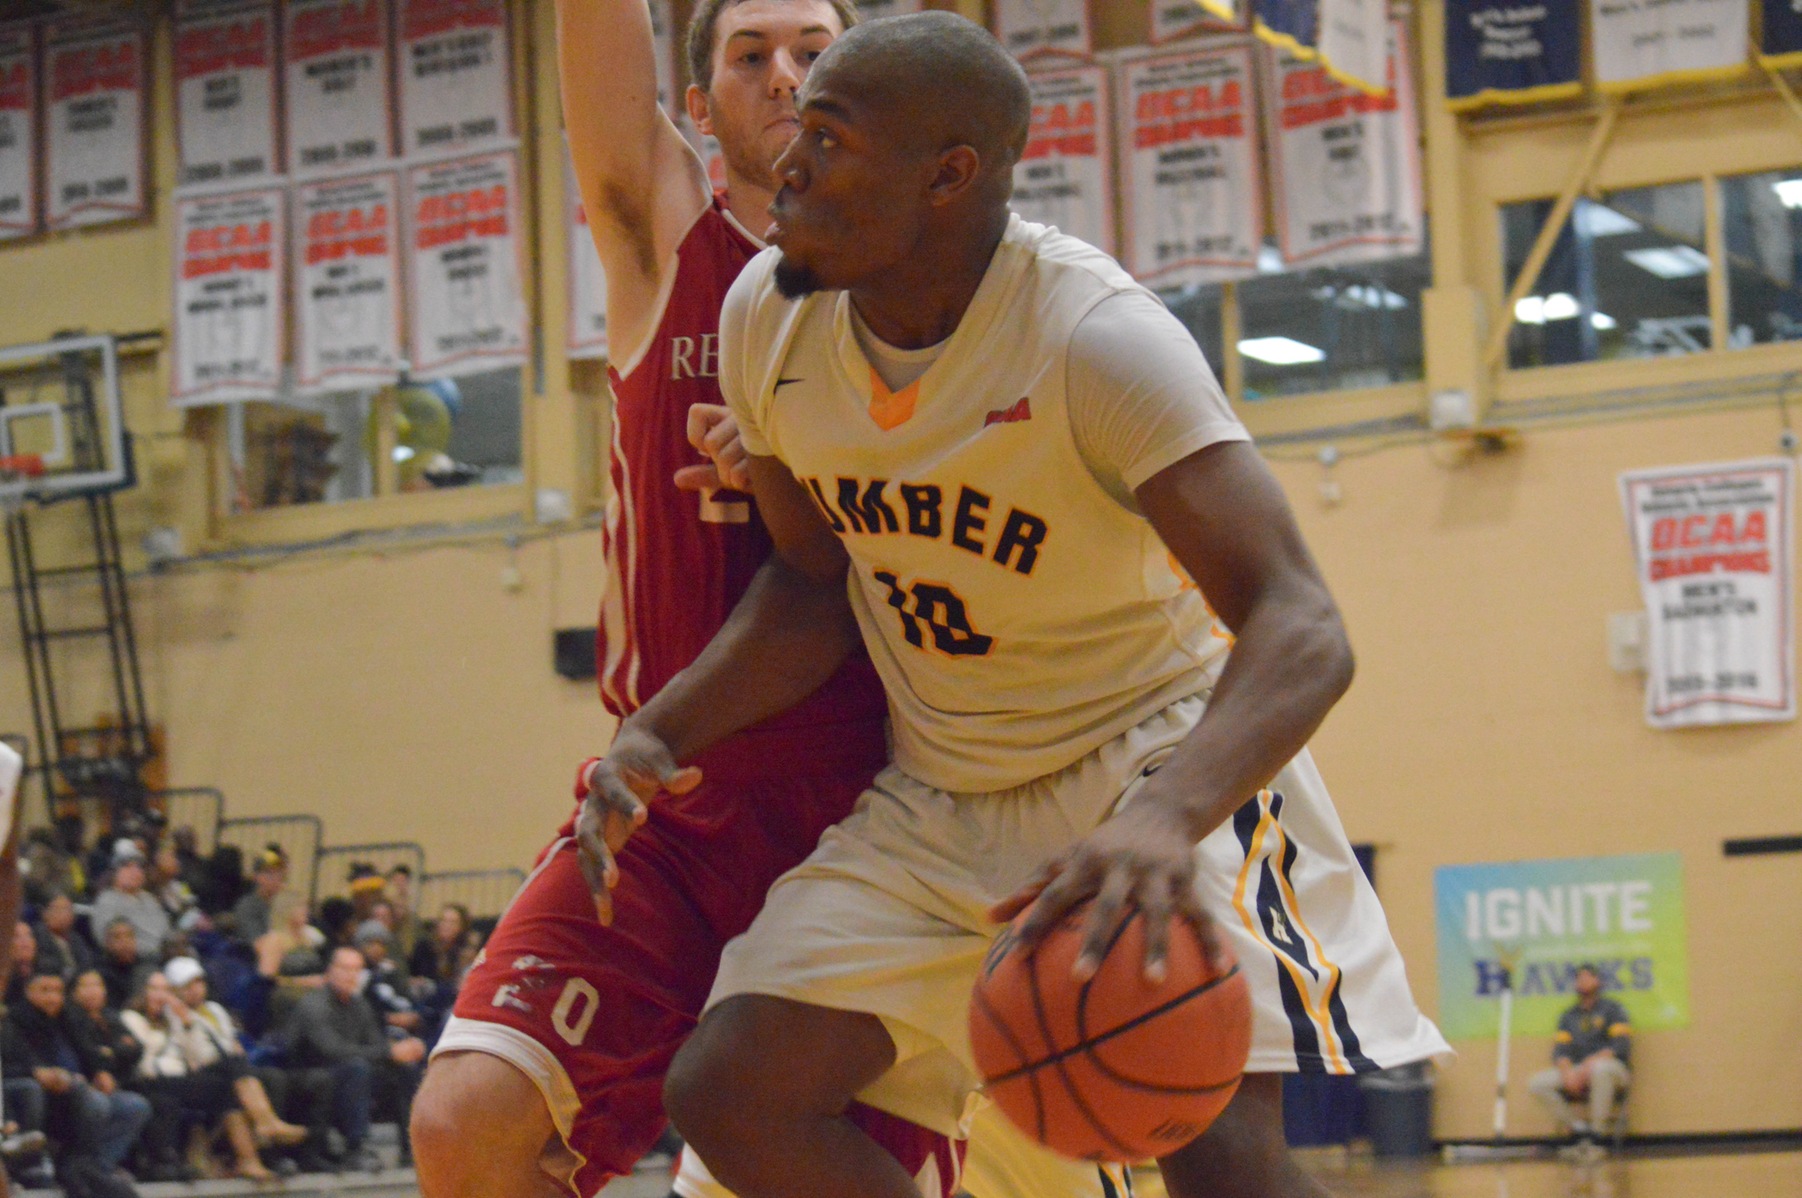 DICKSON SURPASSES 34 YEAR OLD HUMBER BASKETBALL RECORD